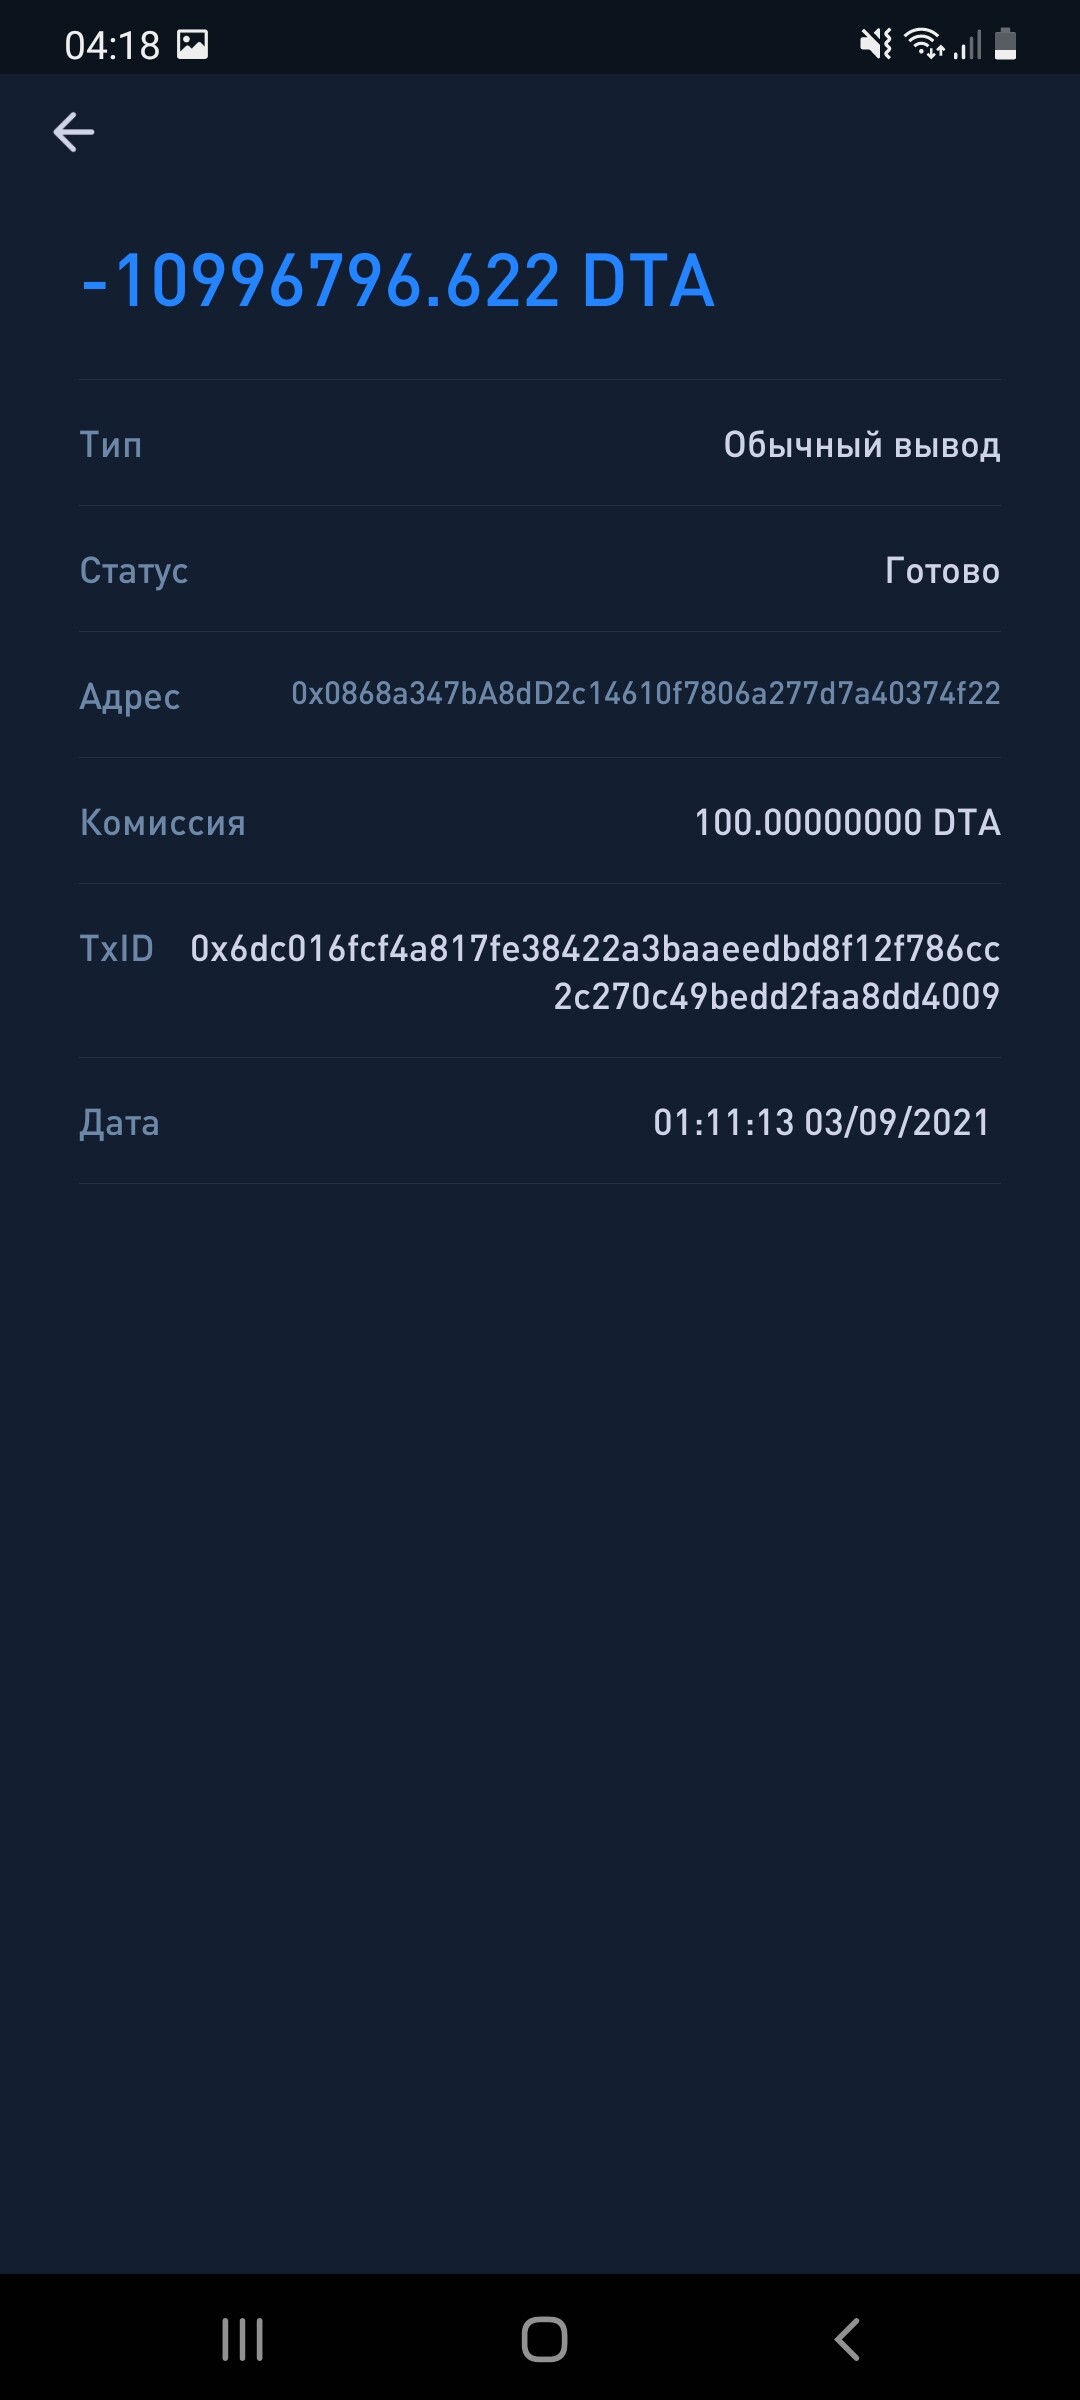 Help me, I can not see mine DATA DTA token in Trust Wallet ...